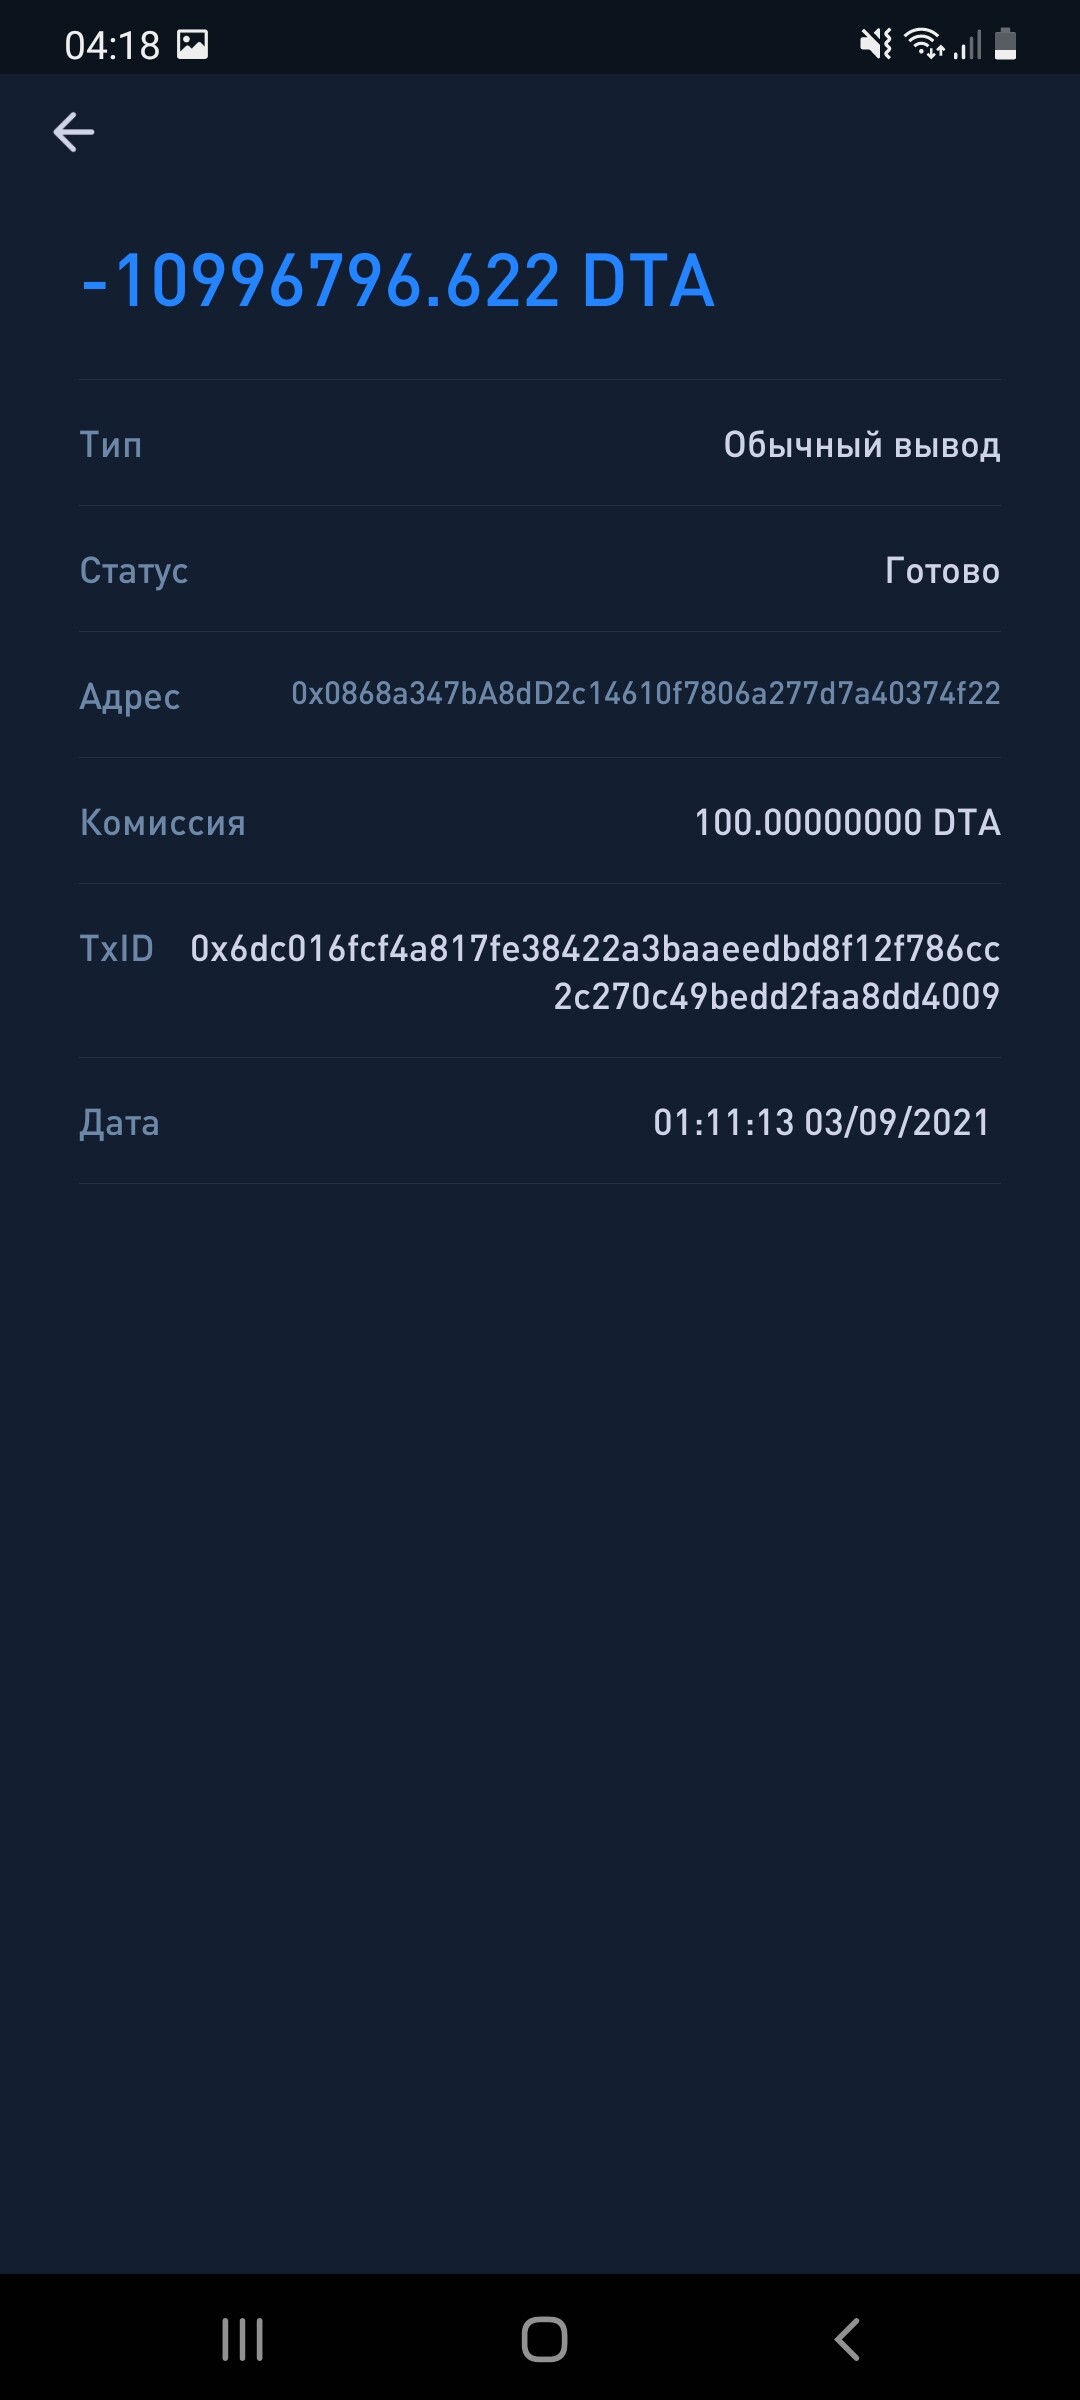 Help me, I can not see mine DATA DTA token in Trust Wallet ...